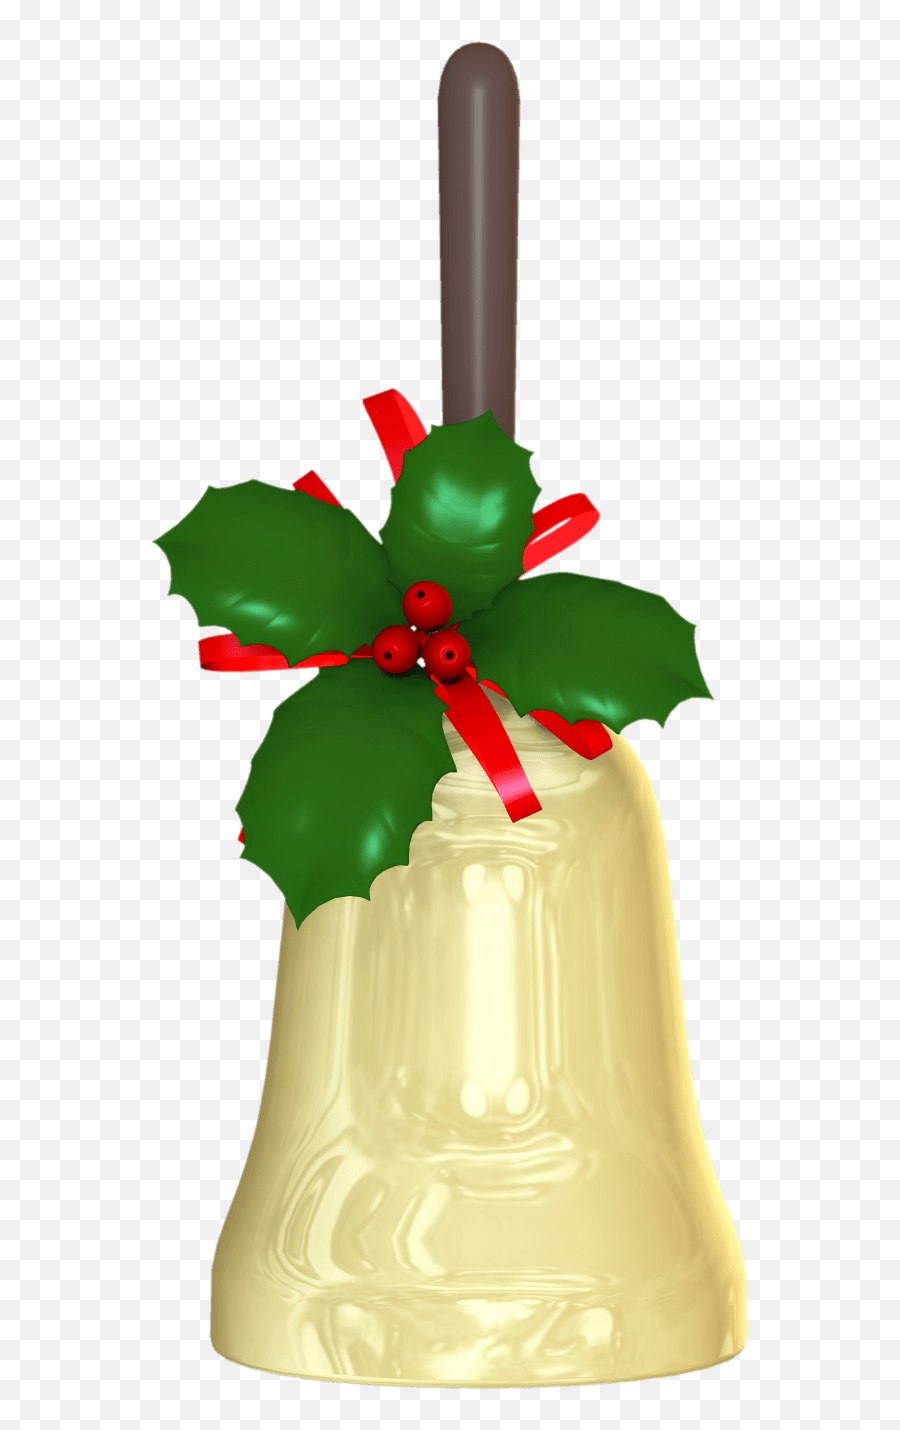 Christmas Bell Graphic Clipartplace - Handbell Emoji,Christmas Bell Clipart